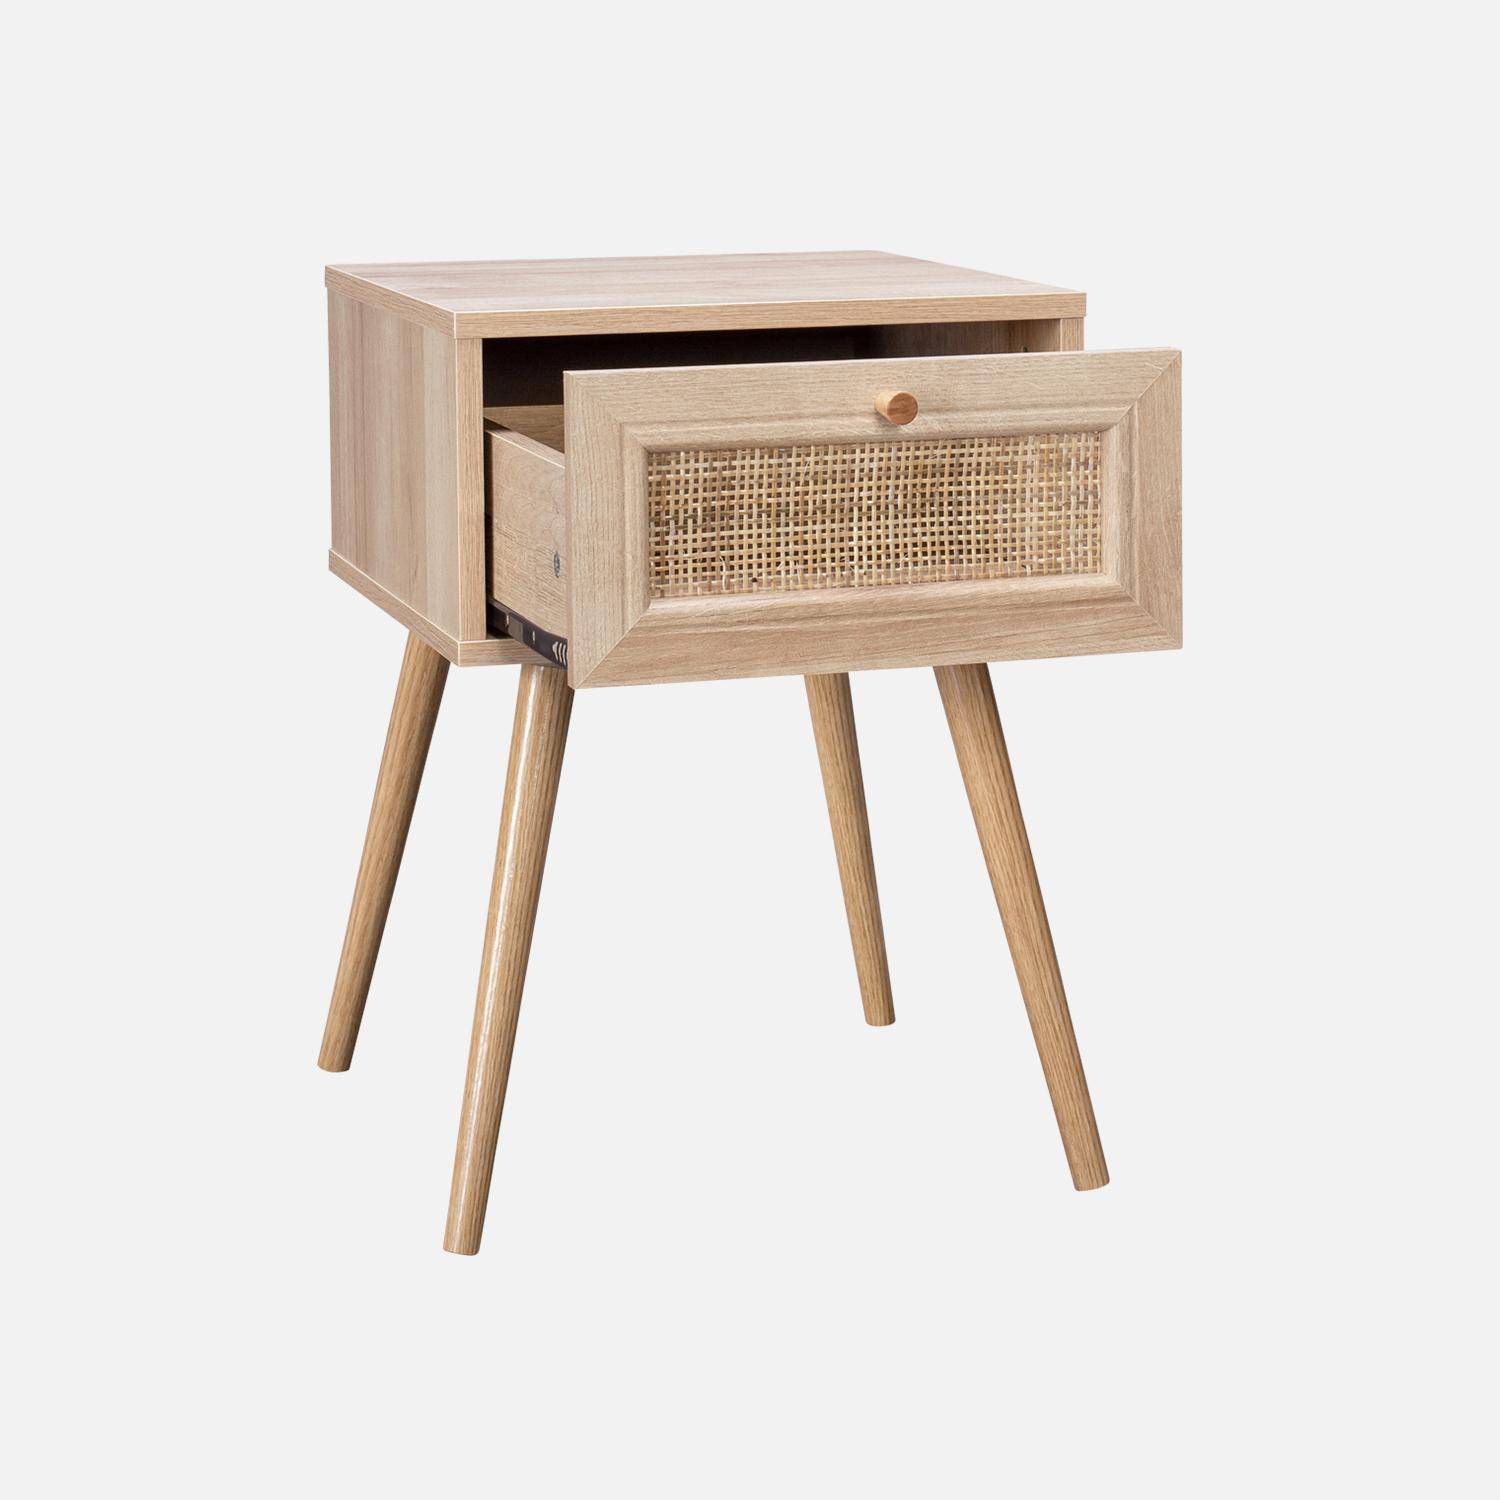 Woven rattan bedside table with drawer, 39x39x55.4cm - Boheme - Natural Wood colour,sweeek,Photo5